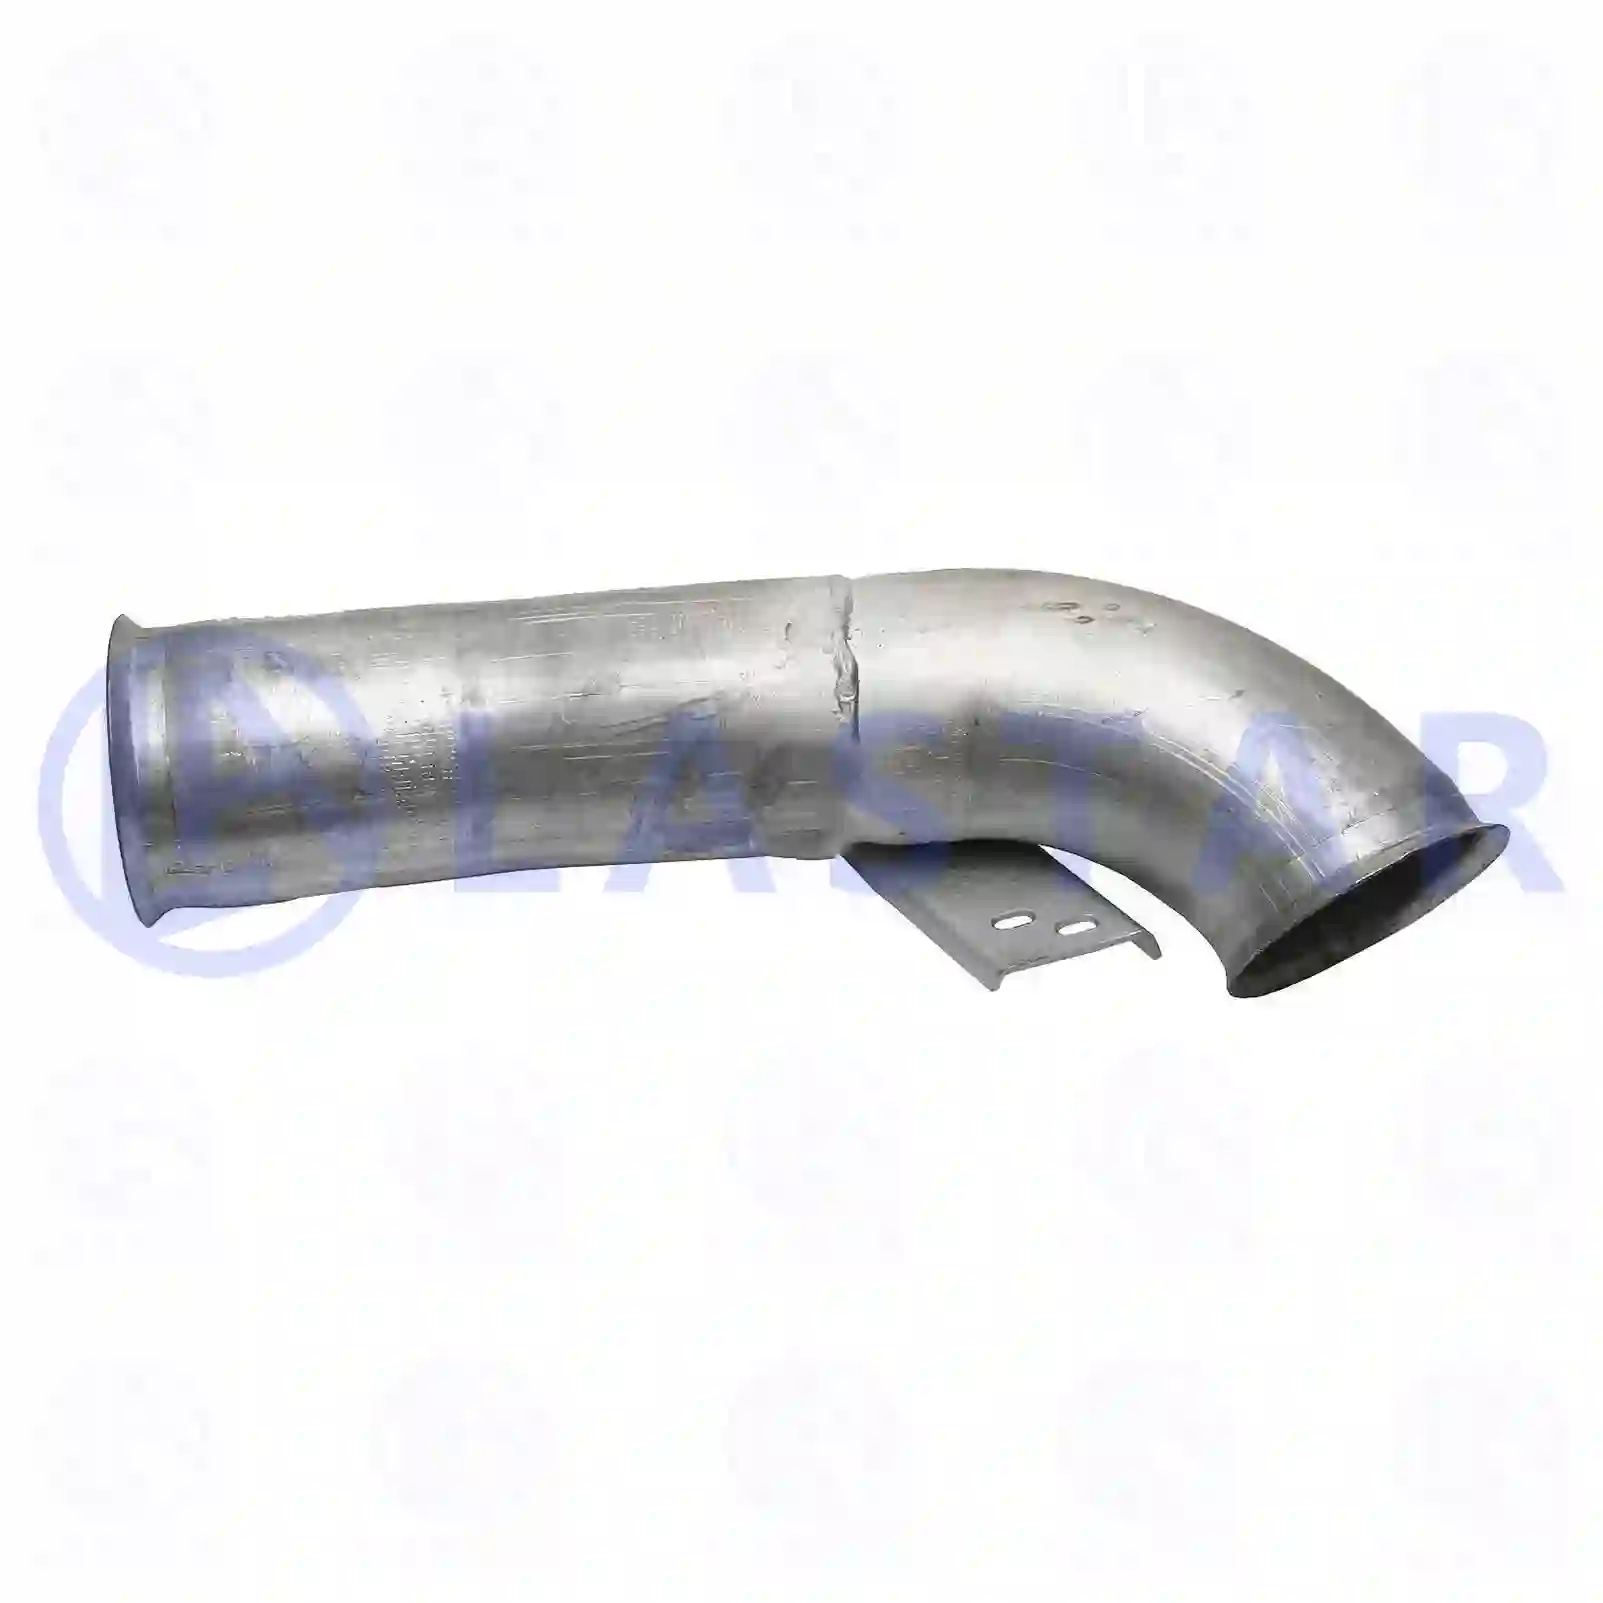 Front exhaust pipe, 77707005, 1380748 ||  77707005 Lastar Spare Part | Truck Spare Parts, Auotomotive Spare Parts Front exhaust pipe, 77707005, 1380748 ||  77707005 Lastar Spare Part | Truck Spare Parts, Auotomotive Spare Parts